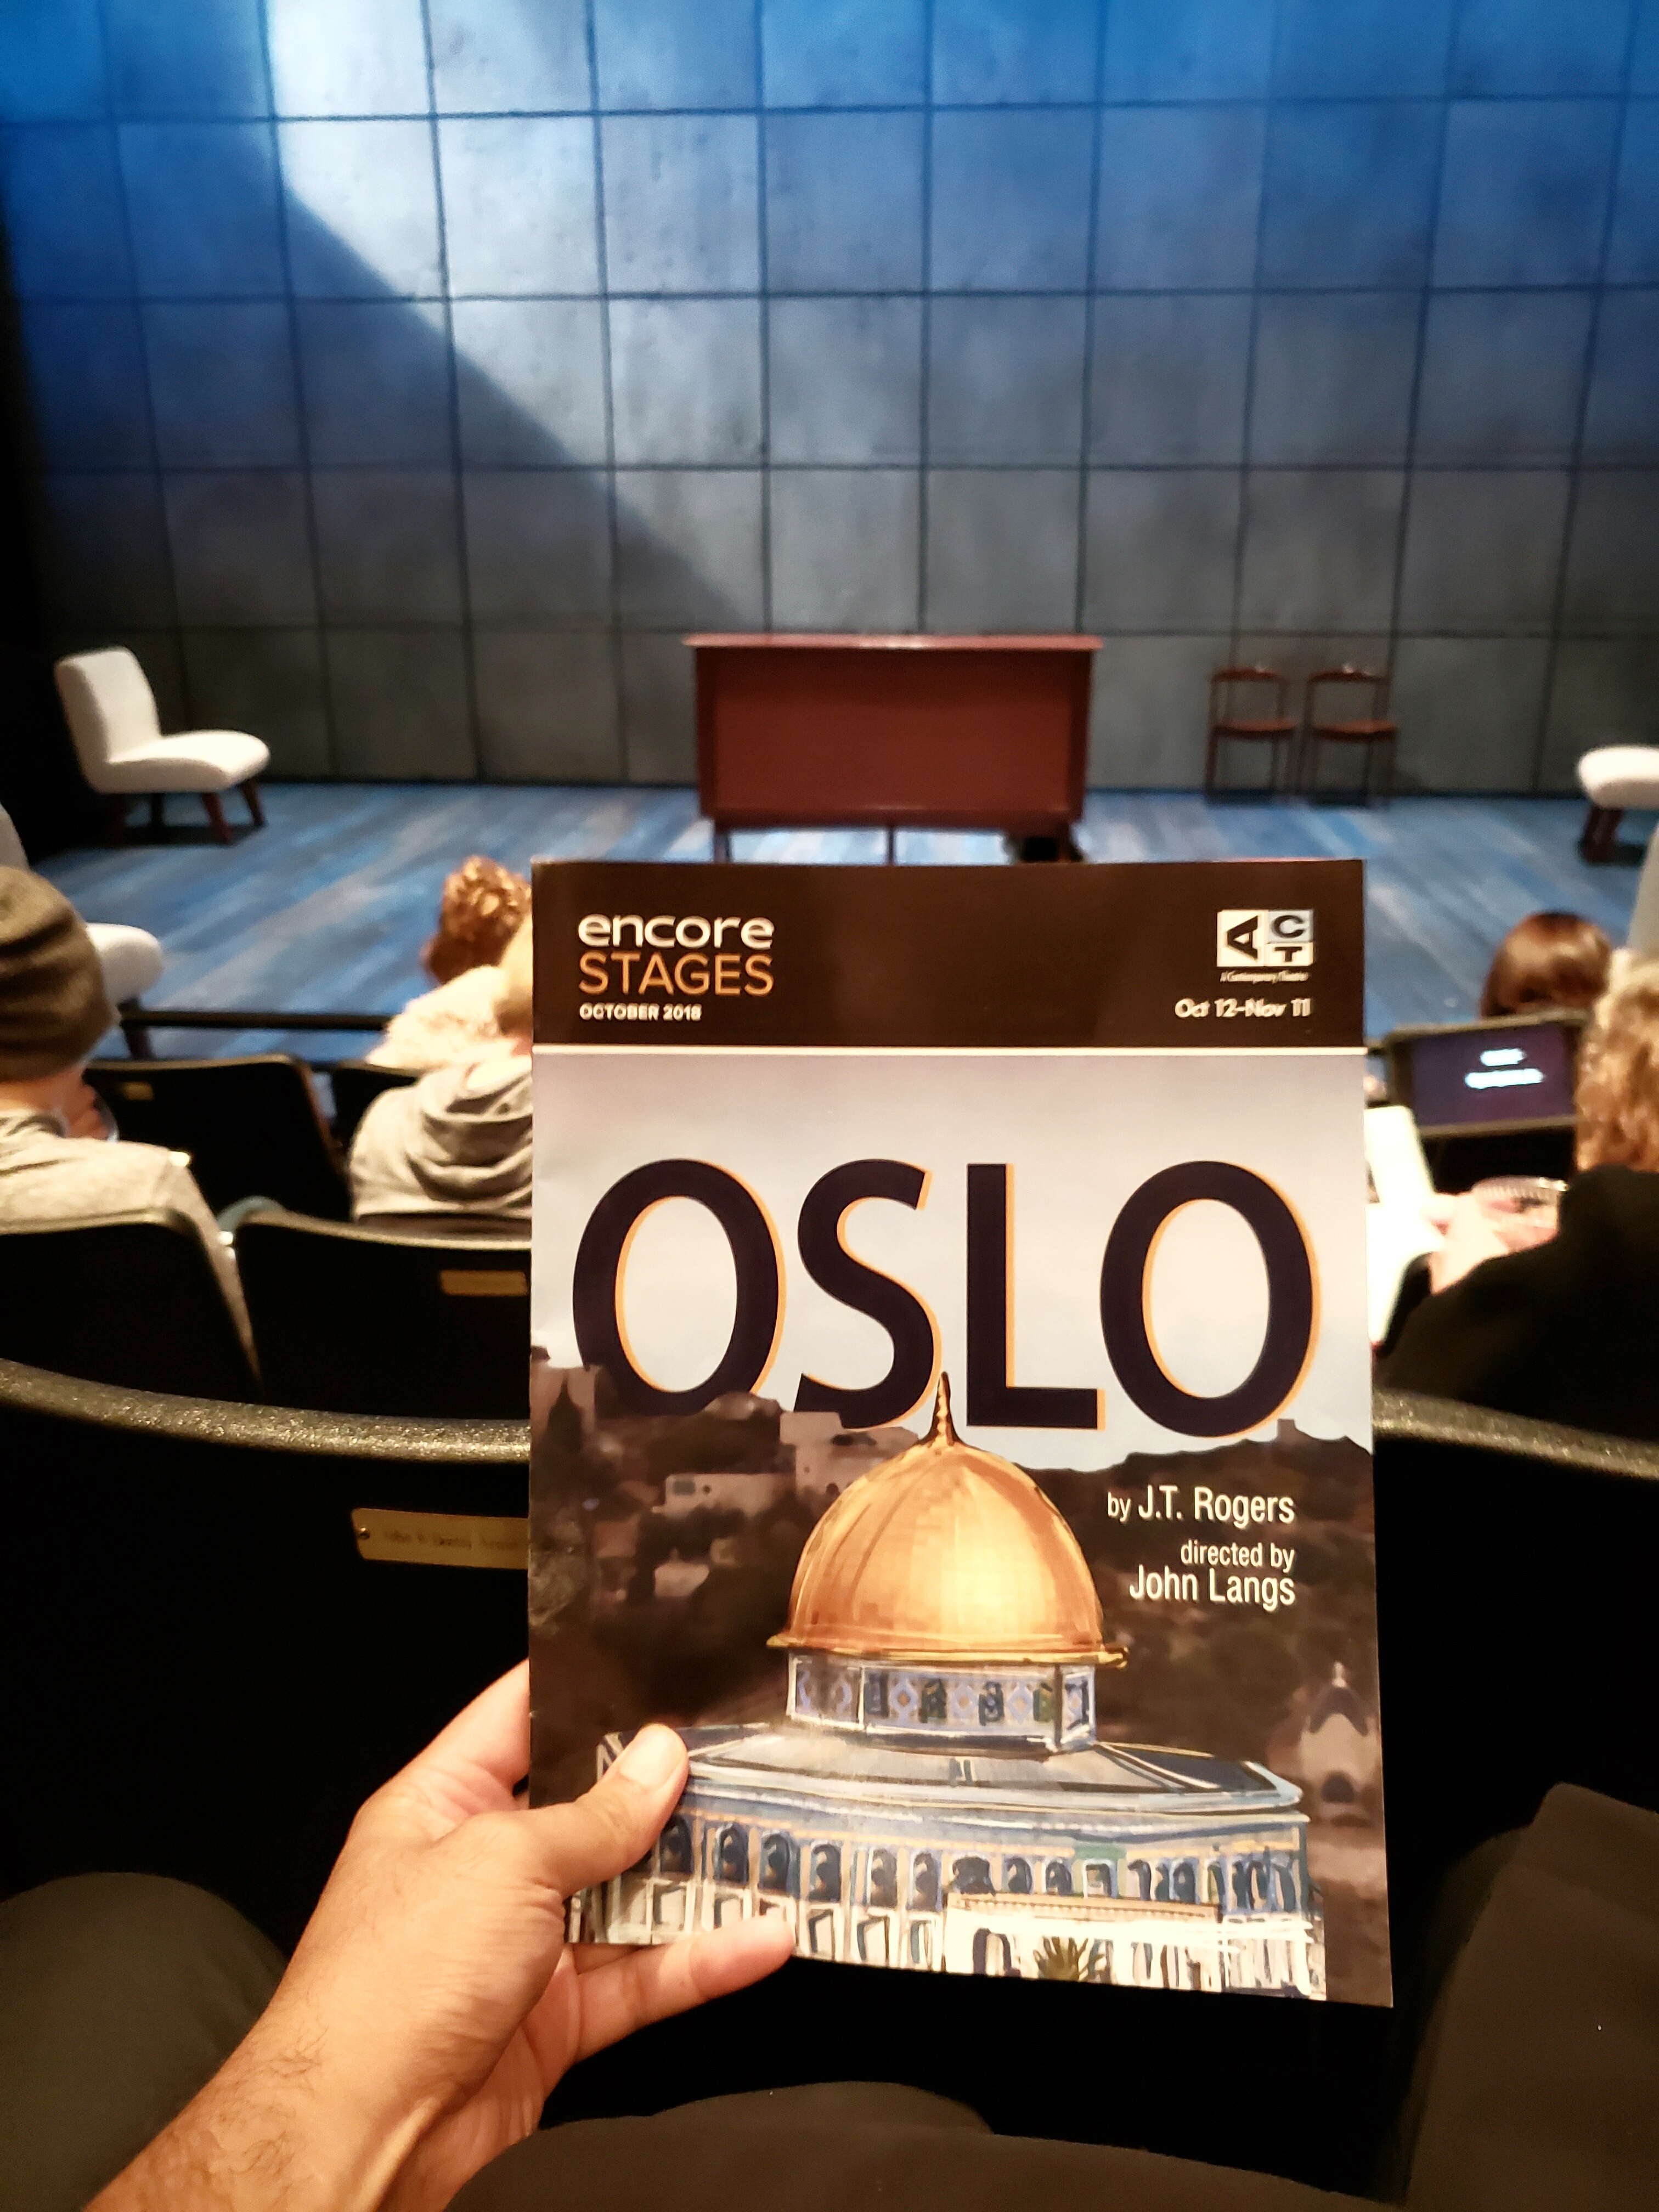 Previewed the Tony Award-winning play Oslo. Political/historical references to the Palestinian-Israeli crisis frequently went over my head. But great dialogue & frequent scene changes engaged my attention throughout this 3 hr (2 intermission) show.